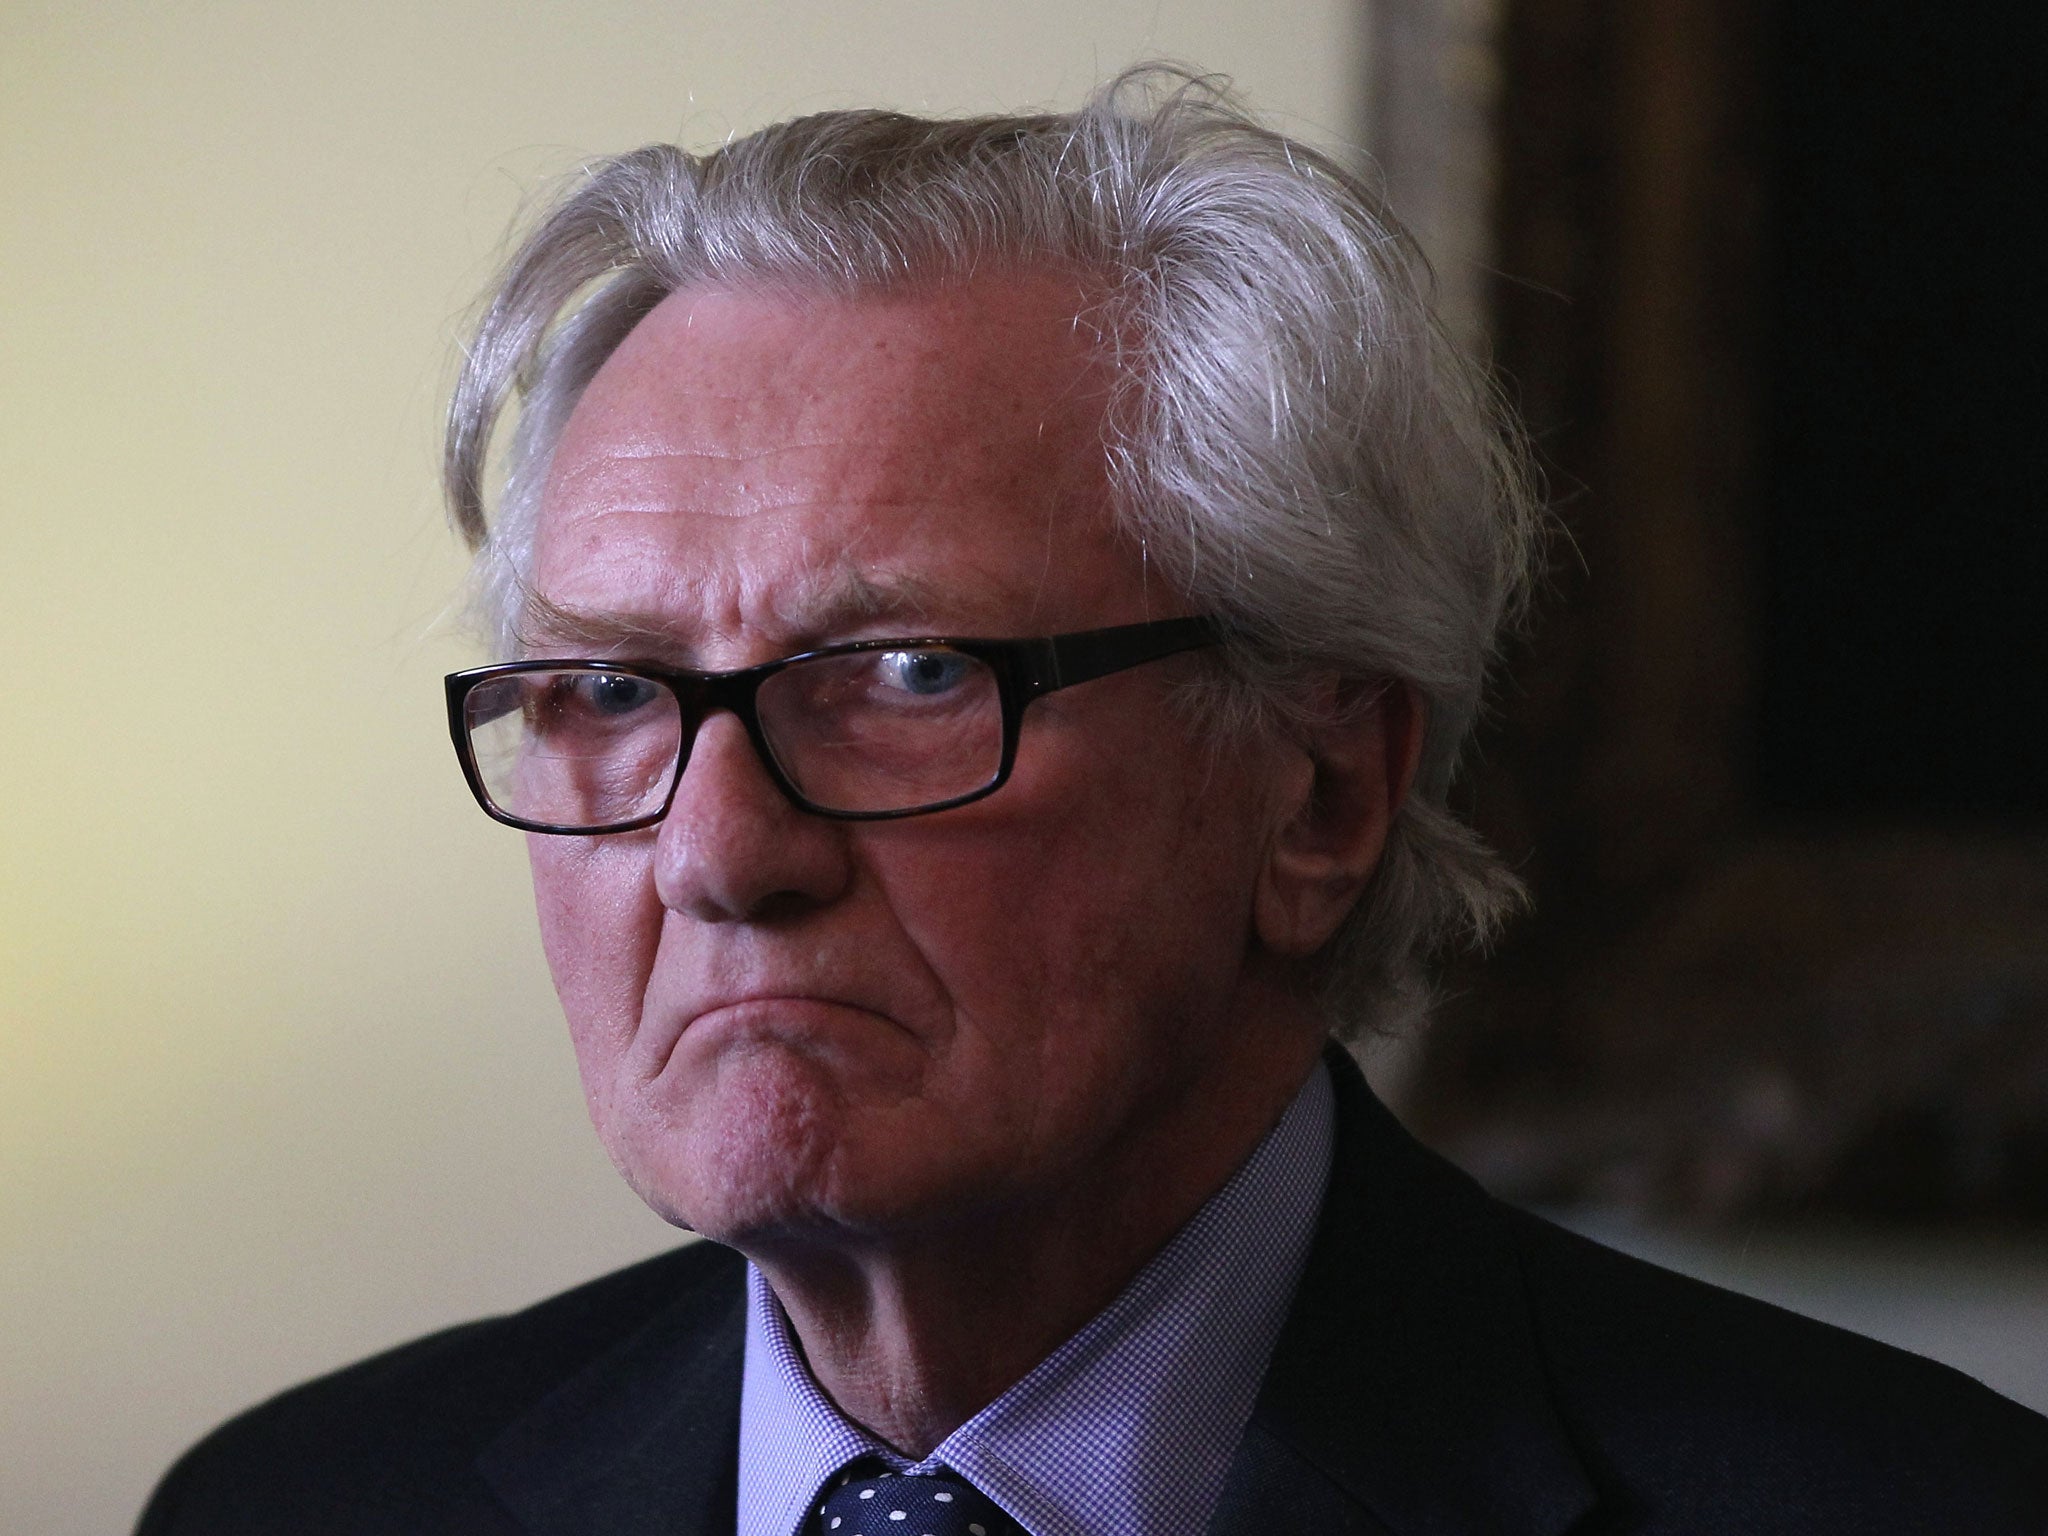 Lord Heseltine listens during a reception at 10 Downing Street on March 27, 2012 in London, England: